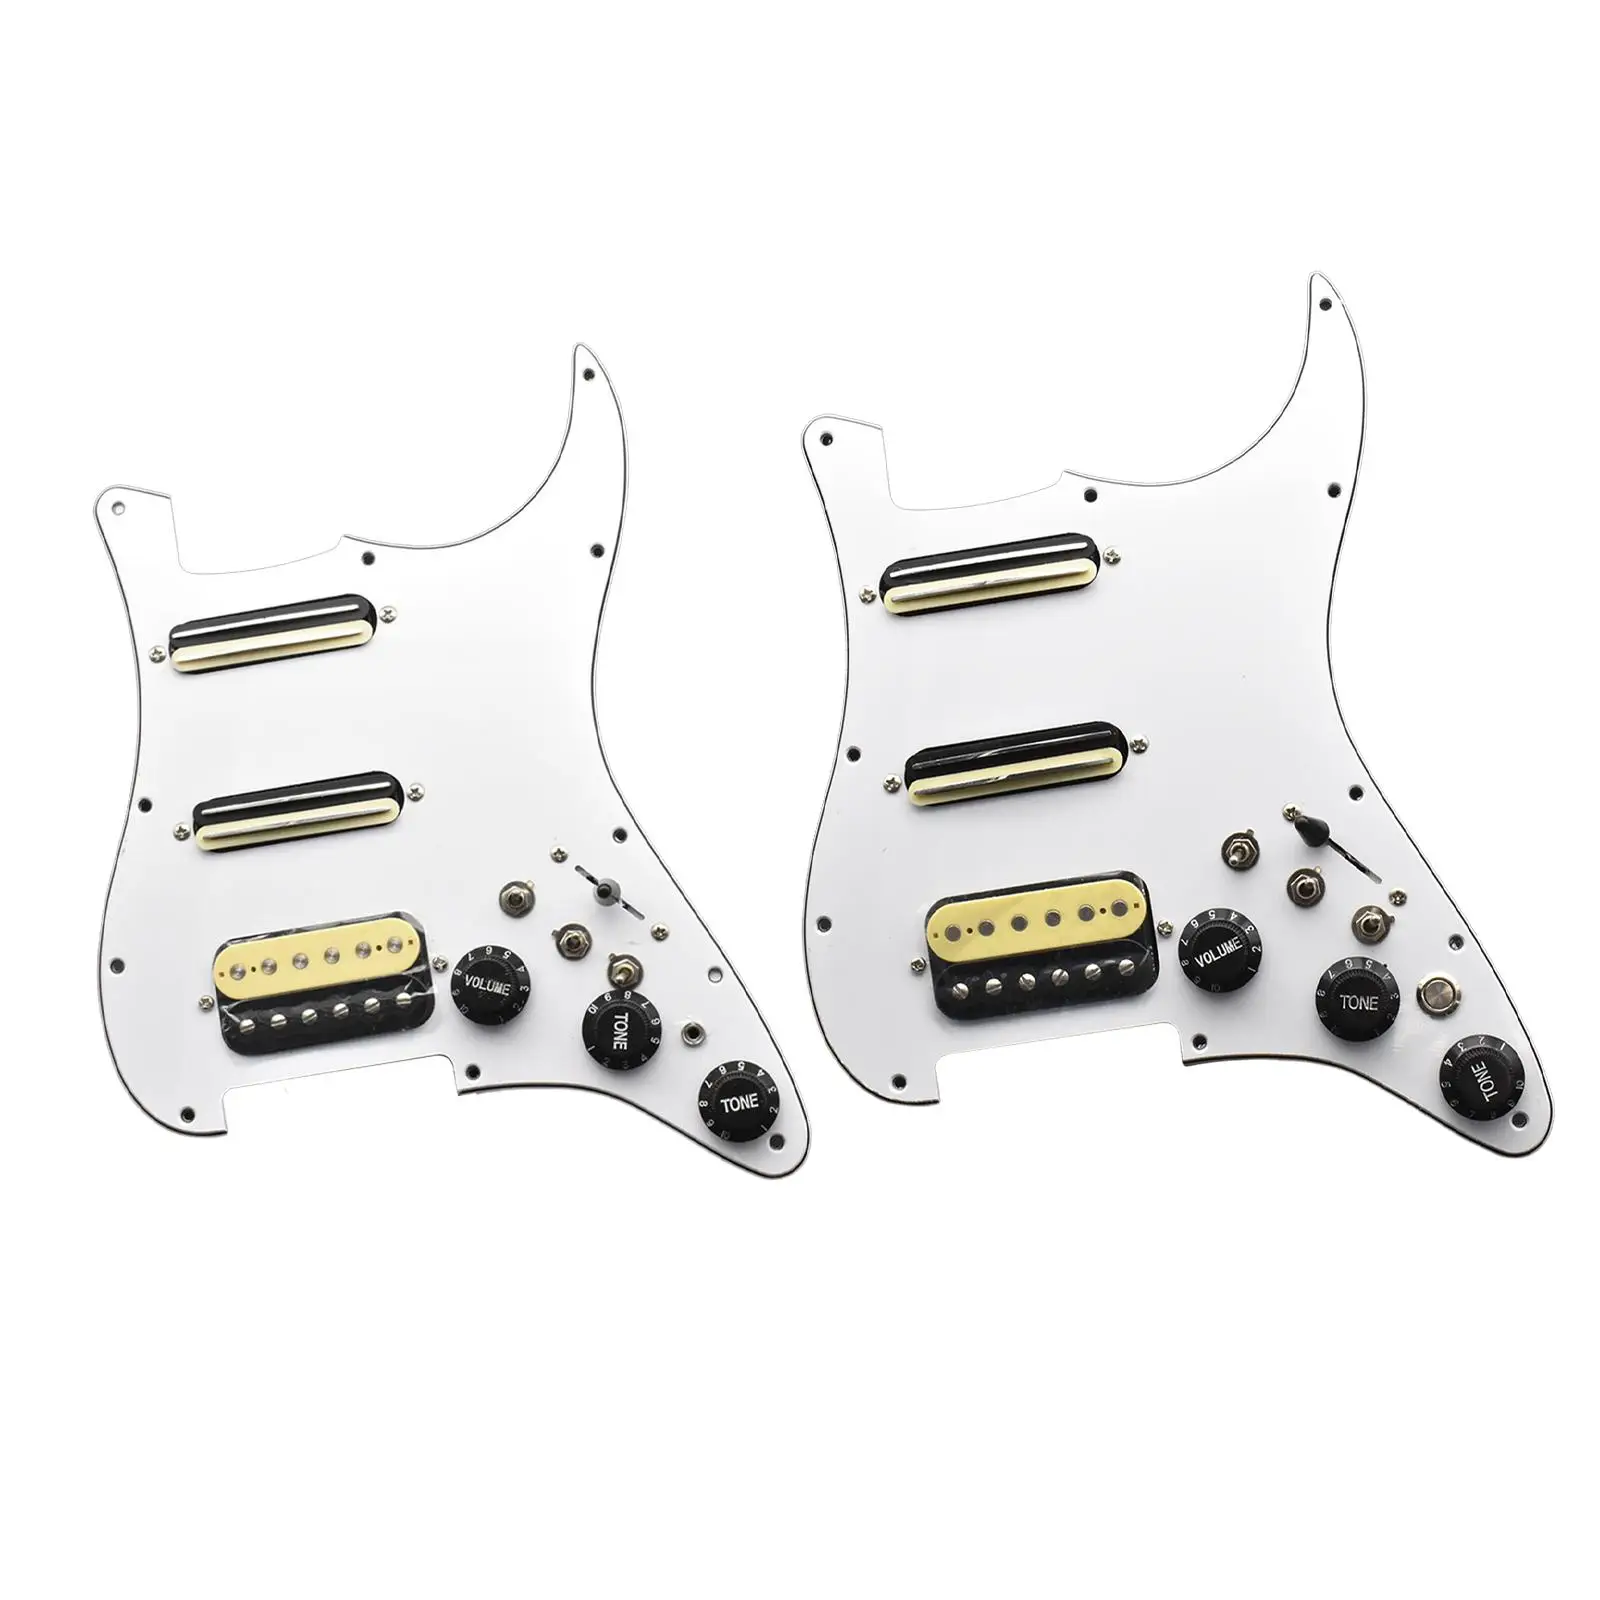 Guitar Loaded Pickguard Direct Replaces Loaded Prewired Pickup Pickguard White Easy Installation Practical Sturdy for Parts